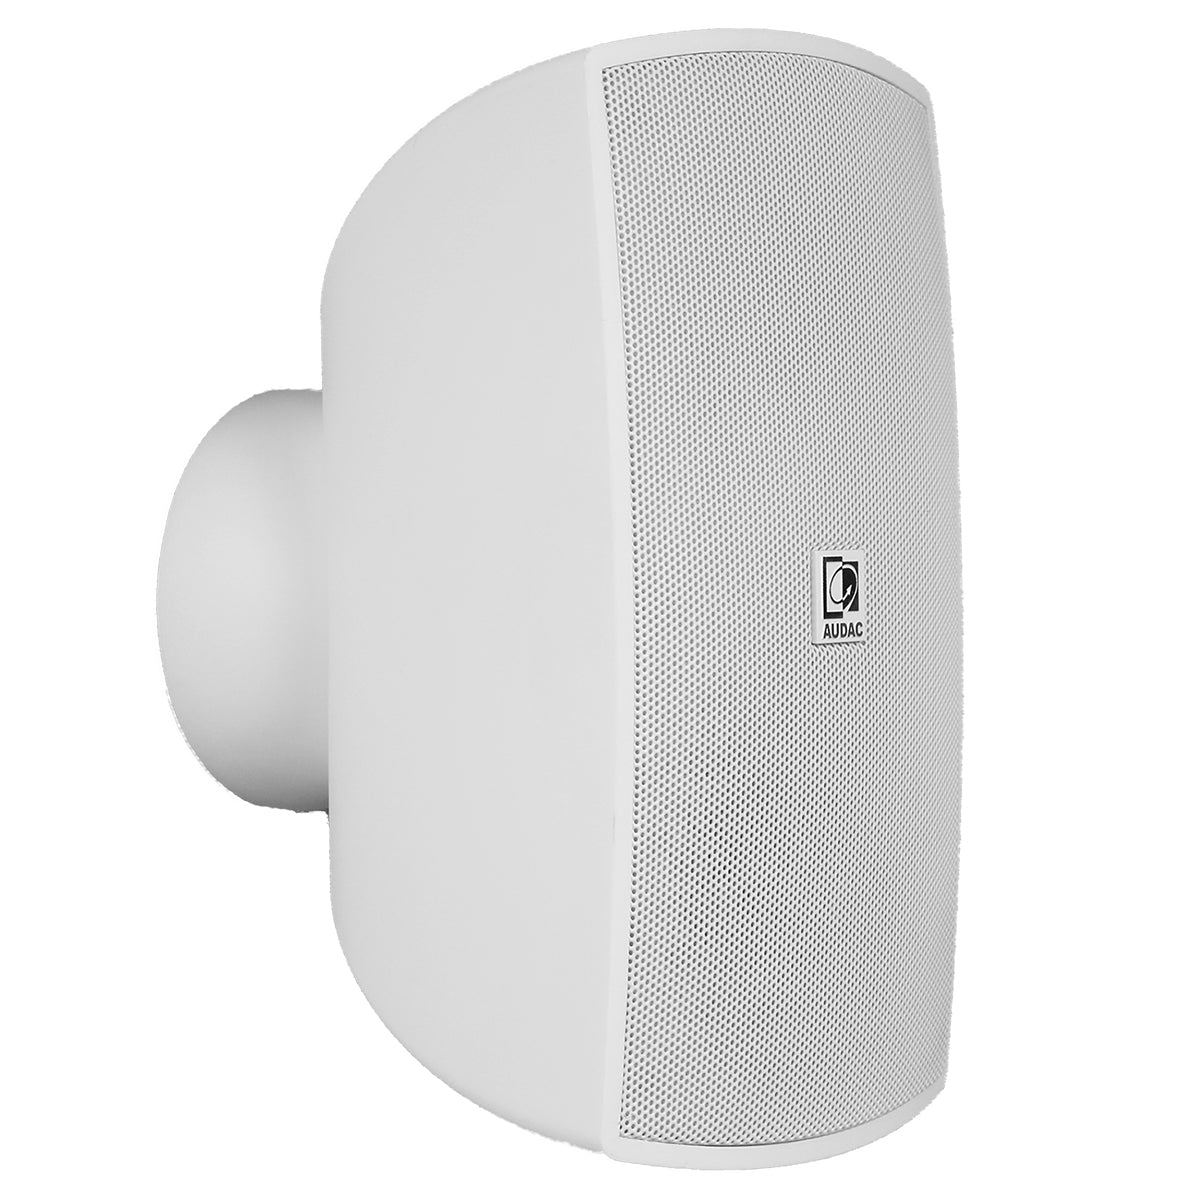 Audac ATEO4MK2 Wall speaker with CleverMount 4" White version - 8ohm and 100V